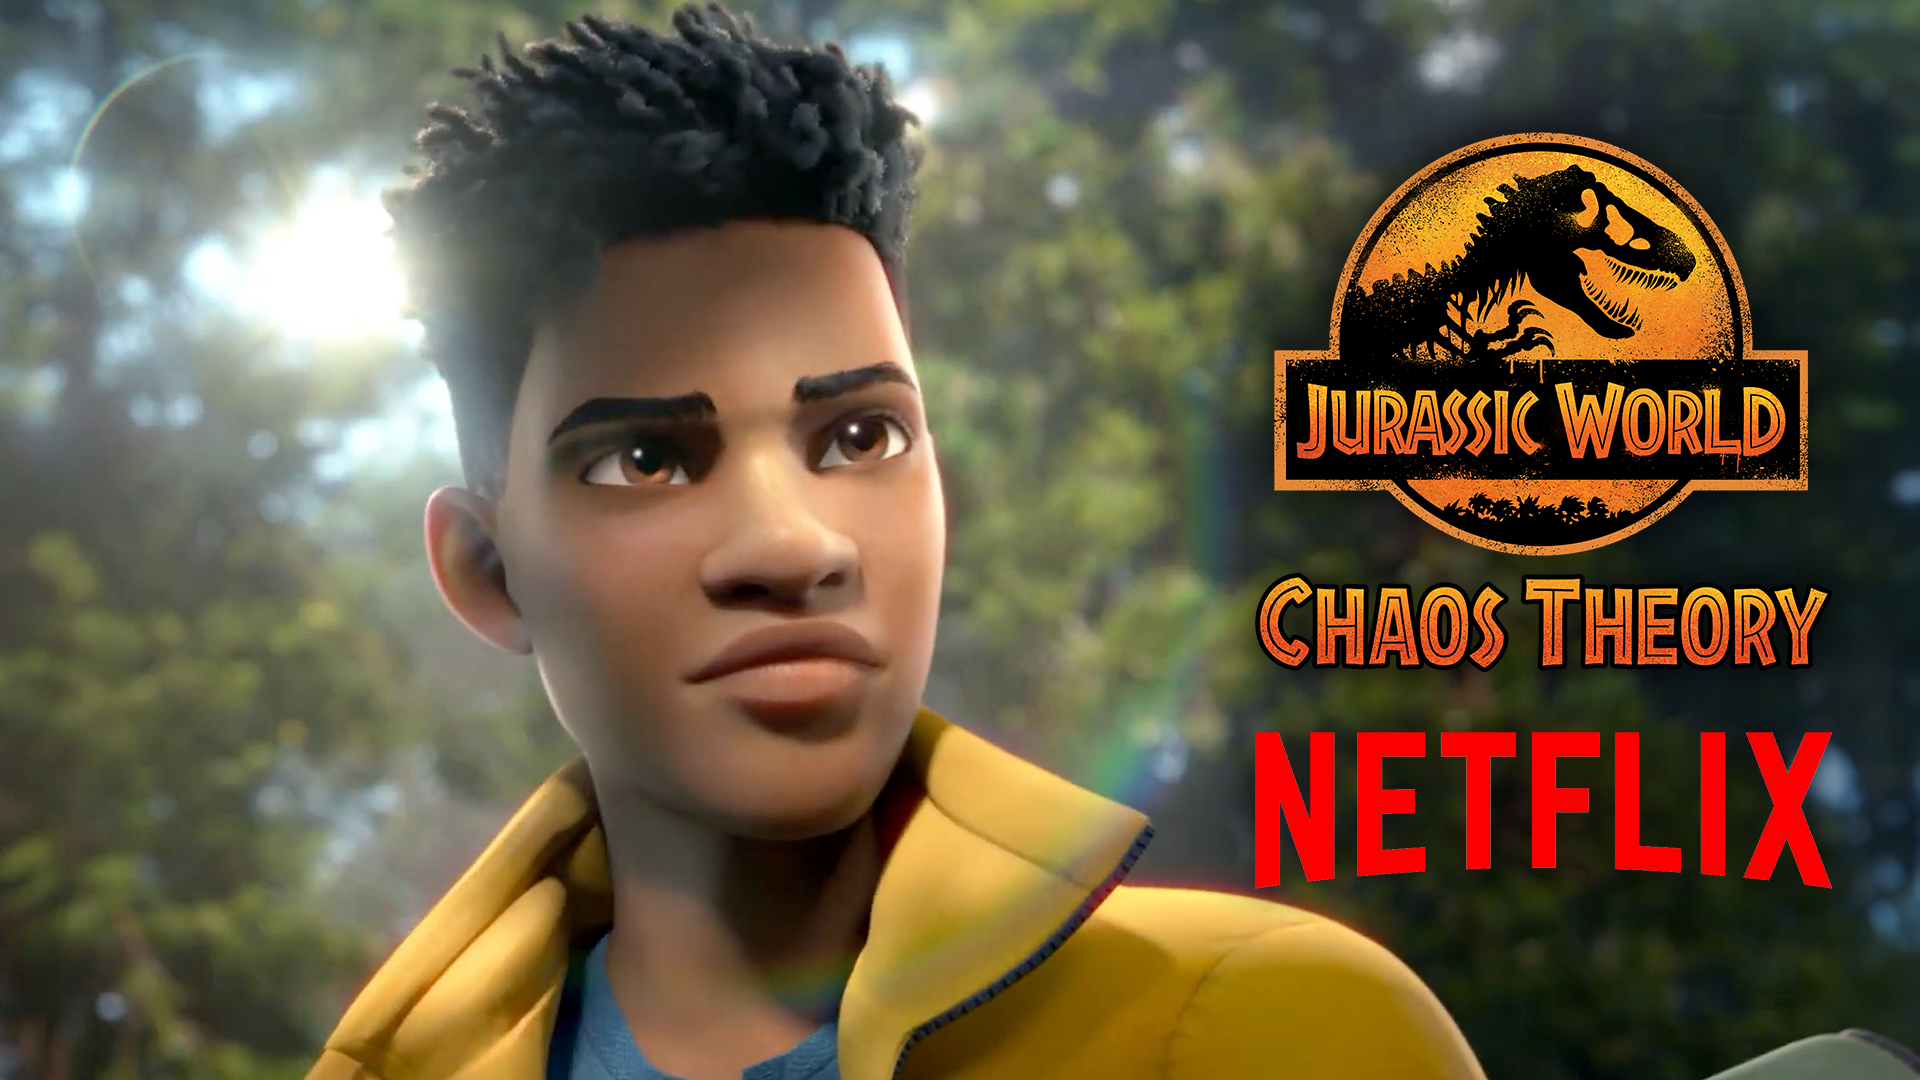 First Trailer for Netflix’s Camp Cretaceous Sequel Series ‘Jurassic World: Chaos Theory’!